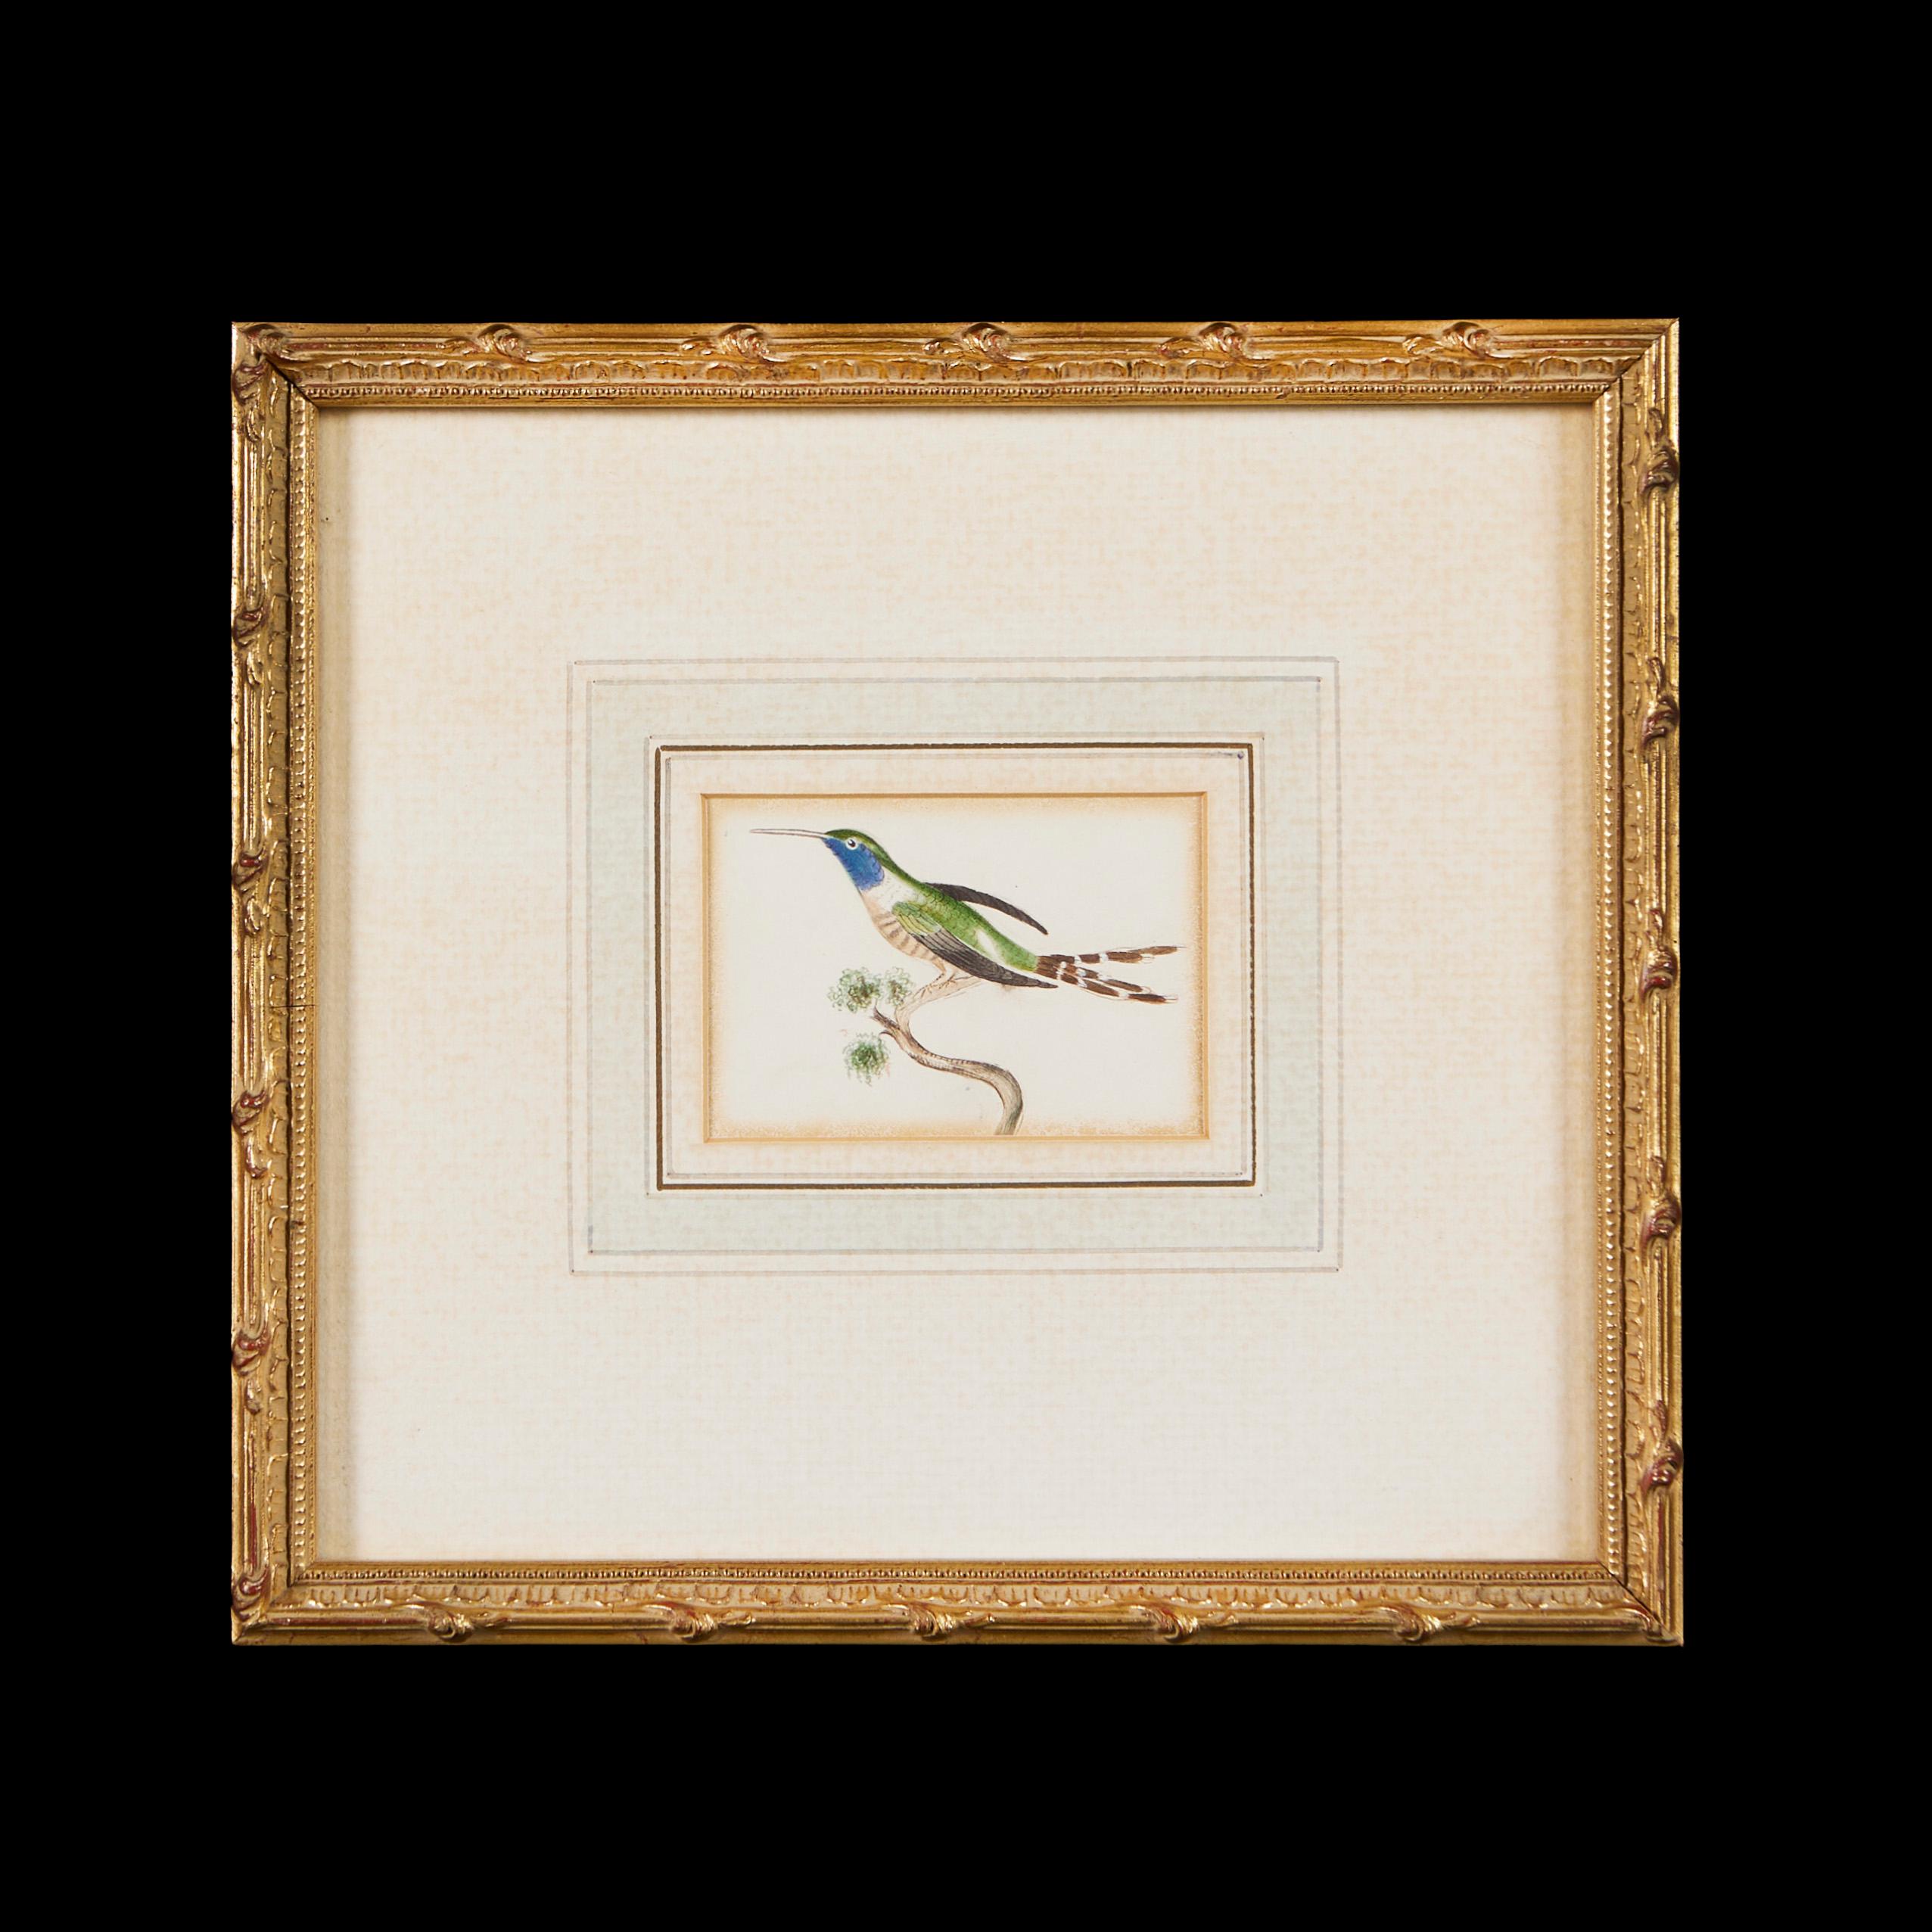 England, circa 1834

Two fine nineteenth century watercolour paintings of exotic birds taken from a sketchbook belonging to the Molyneux family of Isfield, executed on Whatman paper watermarked 1834 and mounted in giltwood frames. 

Height